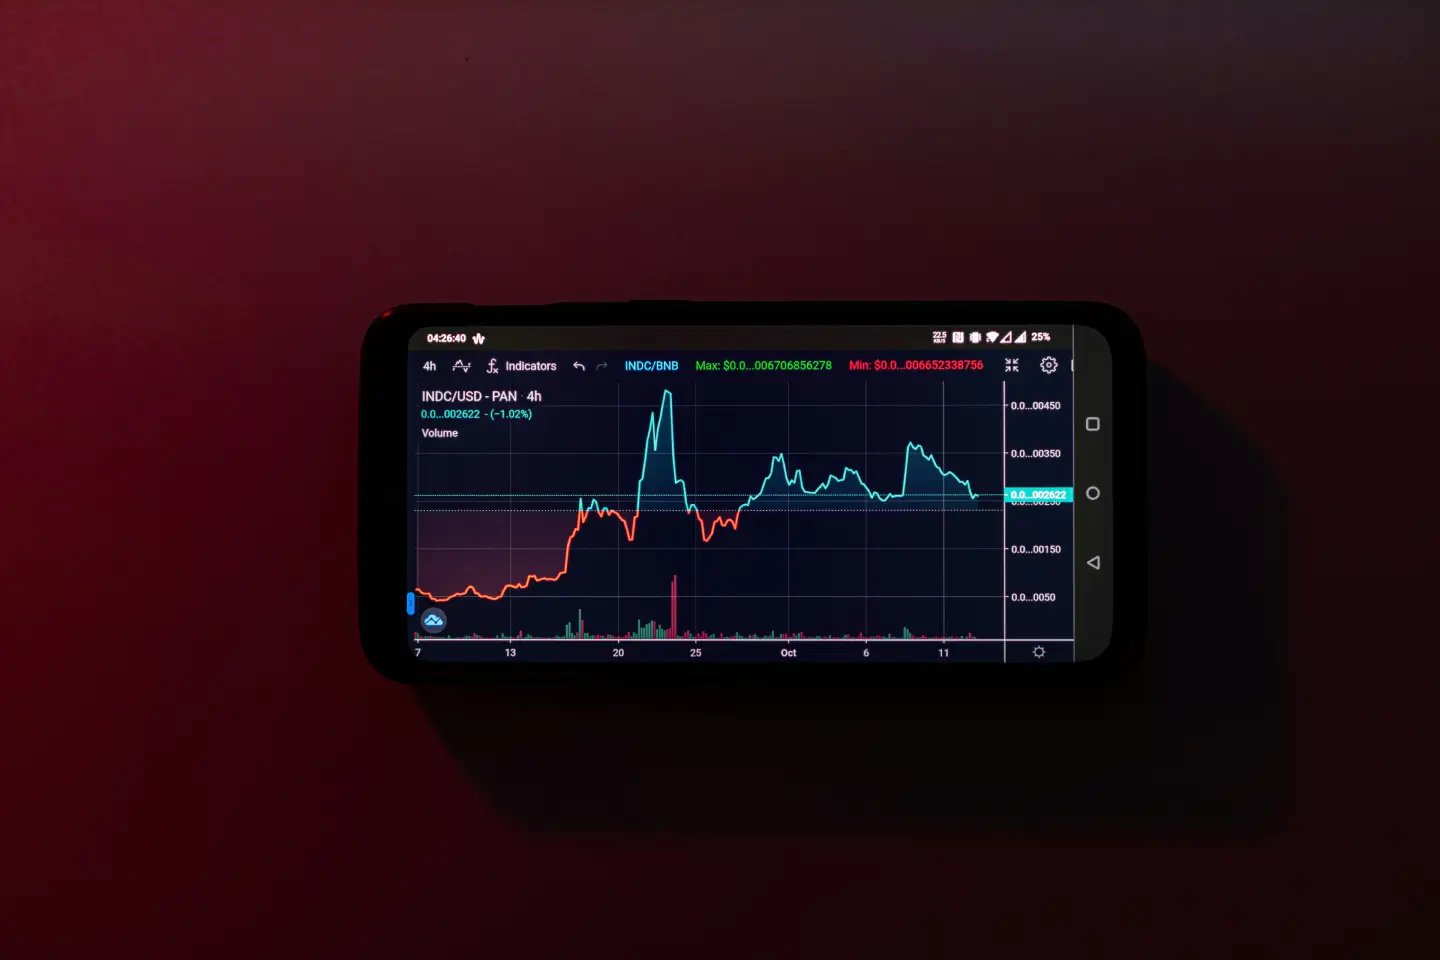 a-cell-phone-displaying-a-stock-chart-on-a-red-background